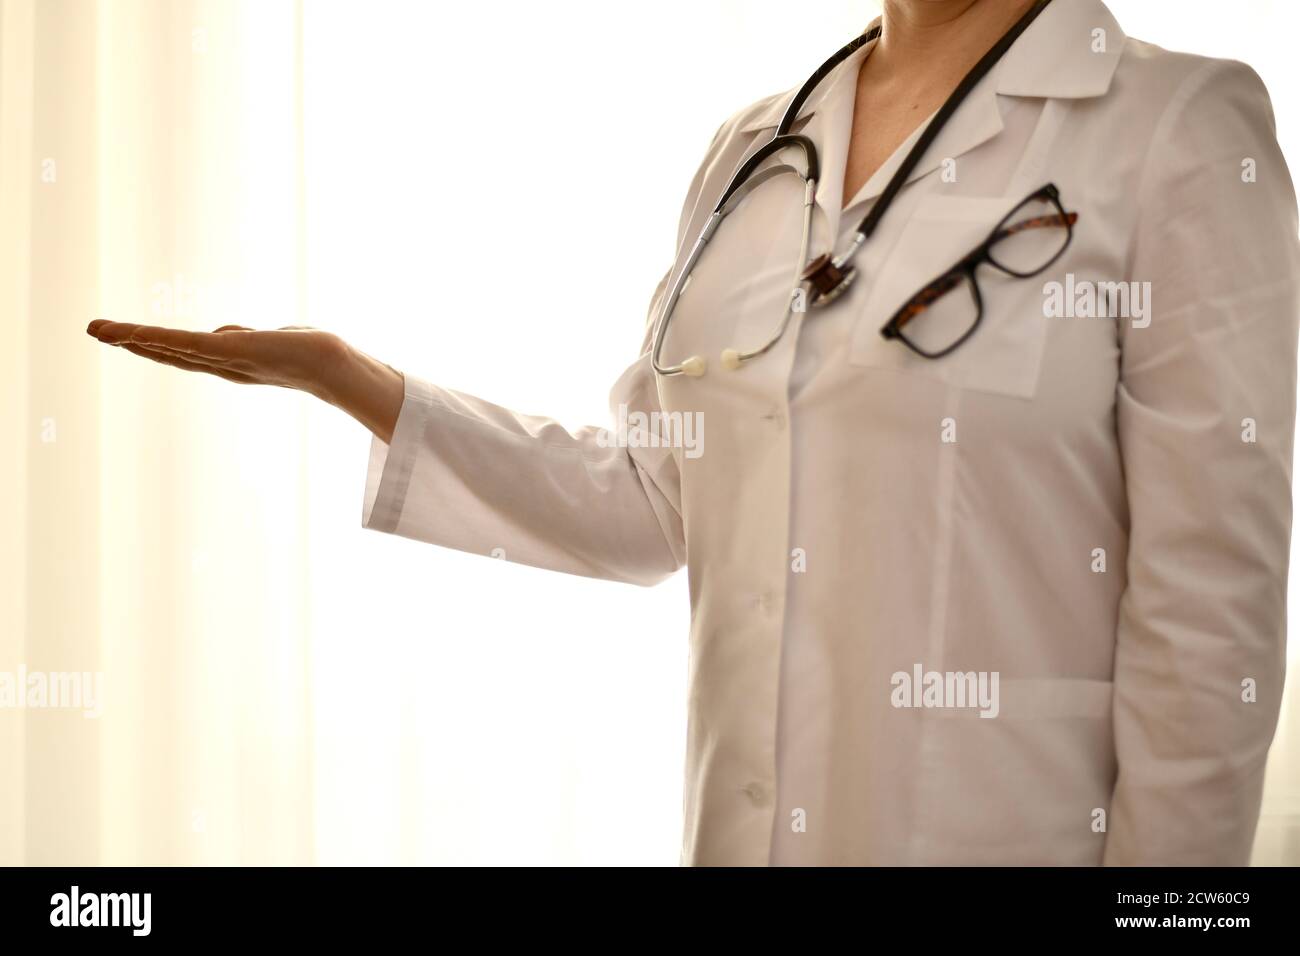 The doctor in a white robe stands with her arm outstretched and an empty palm showing anything.  Stock Photo